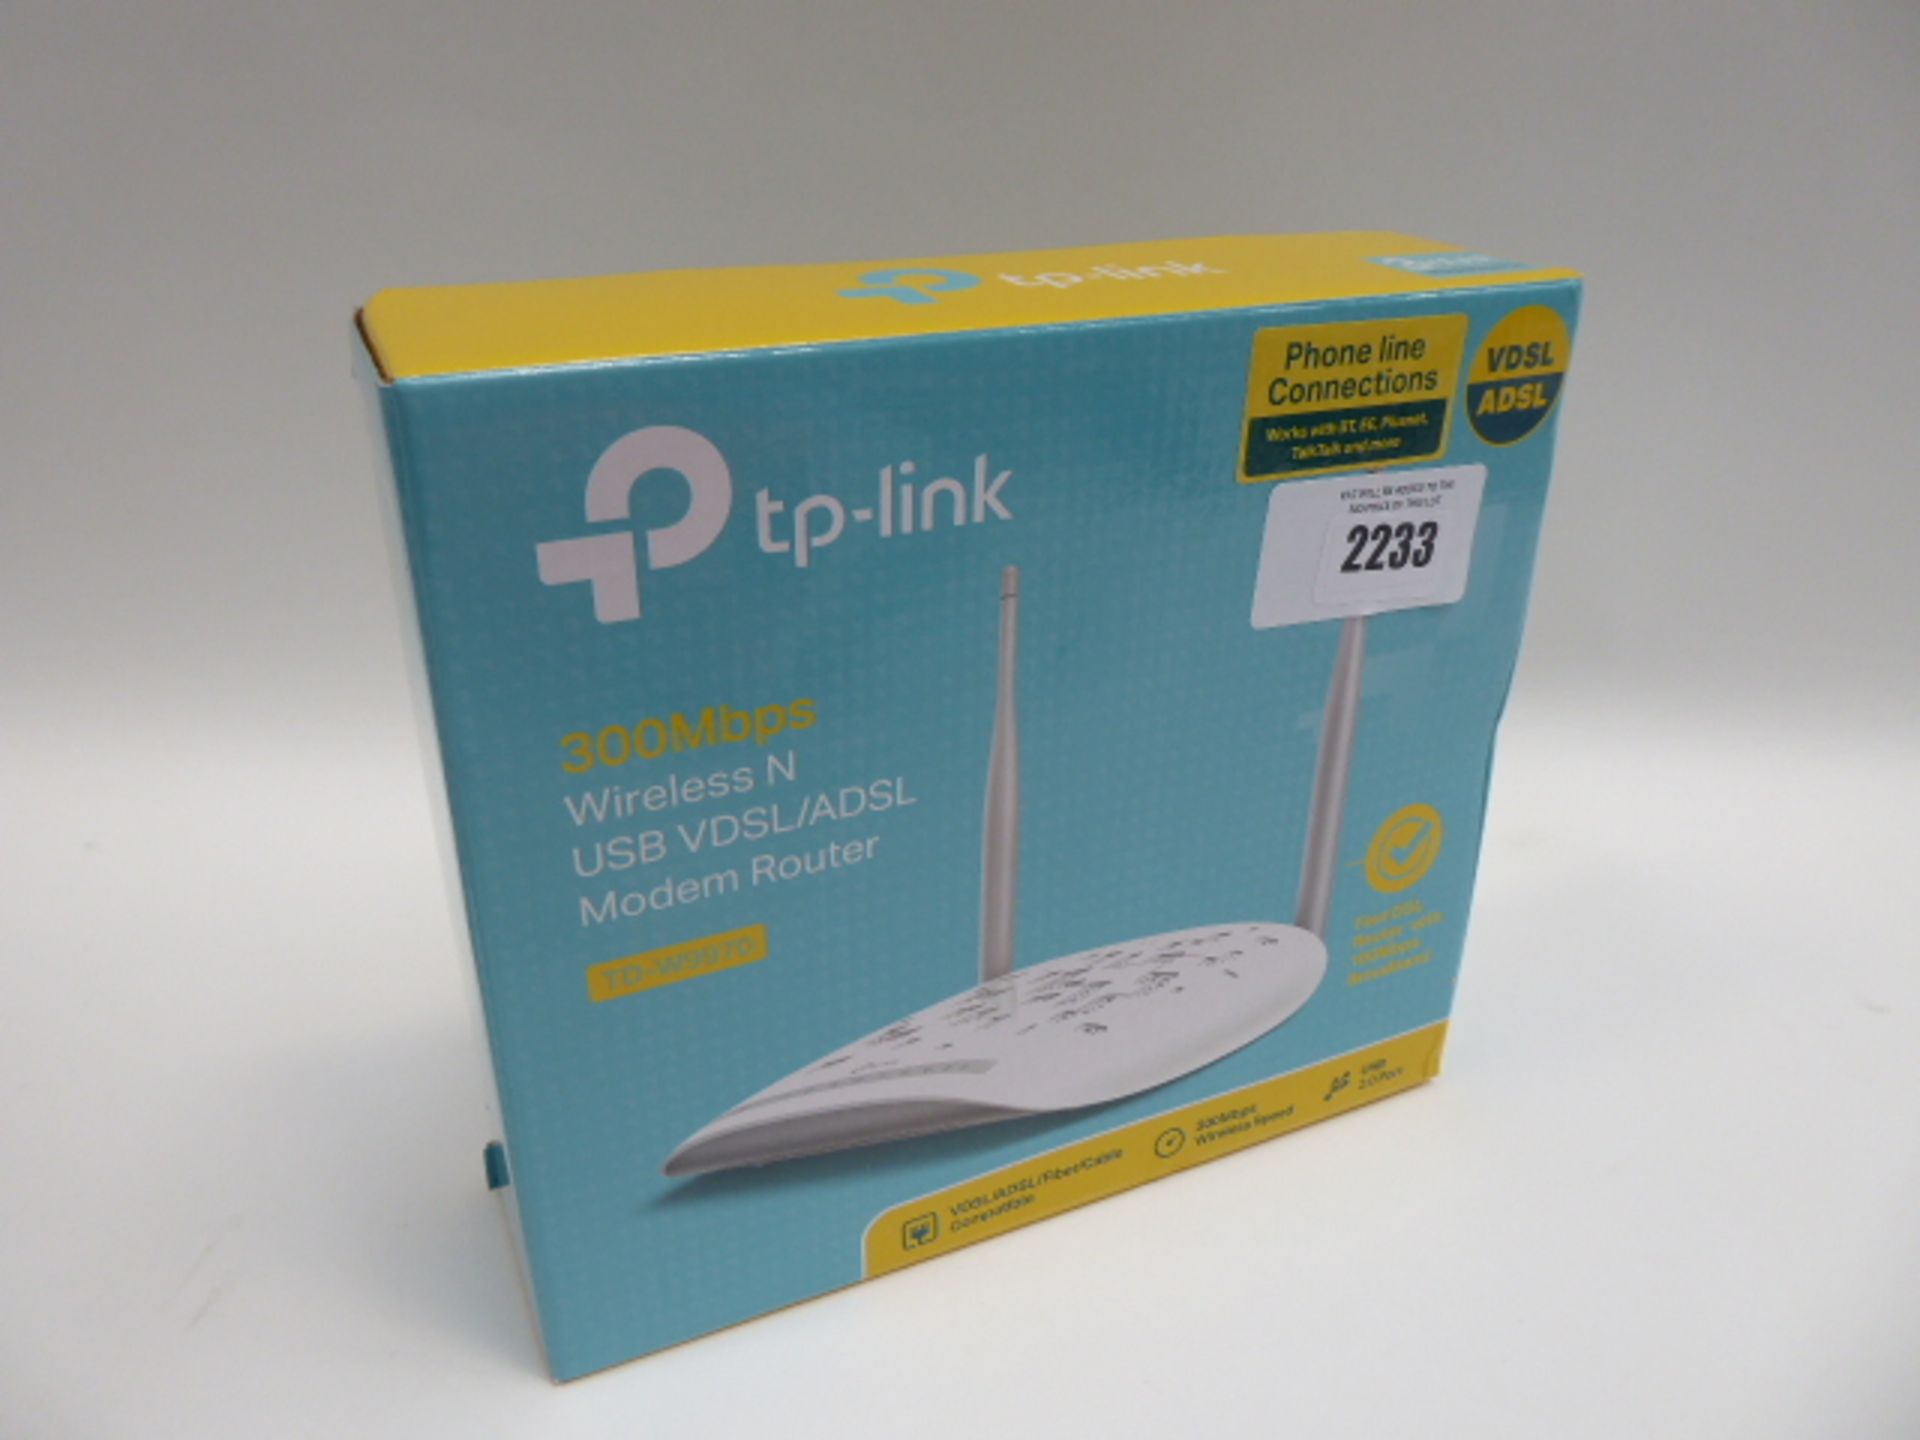 TP-Link TD-W9970 router